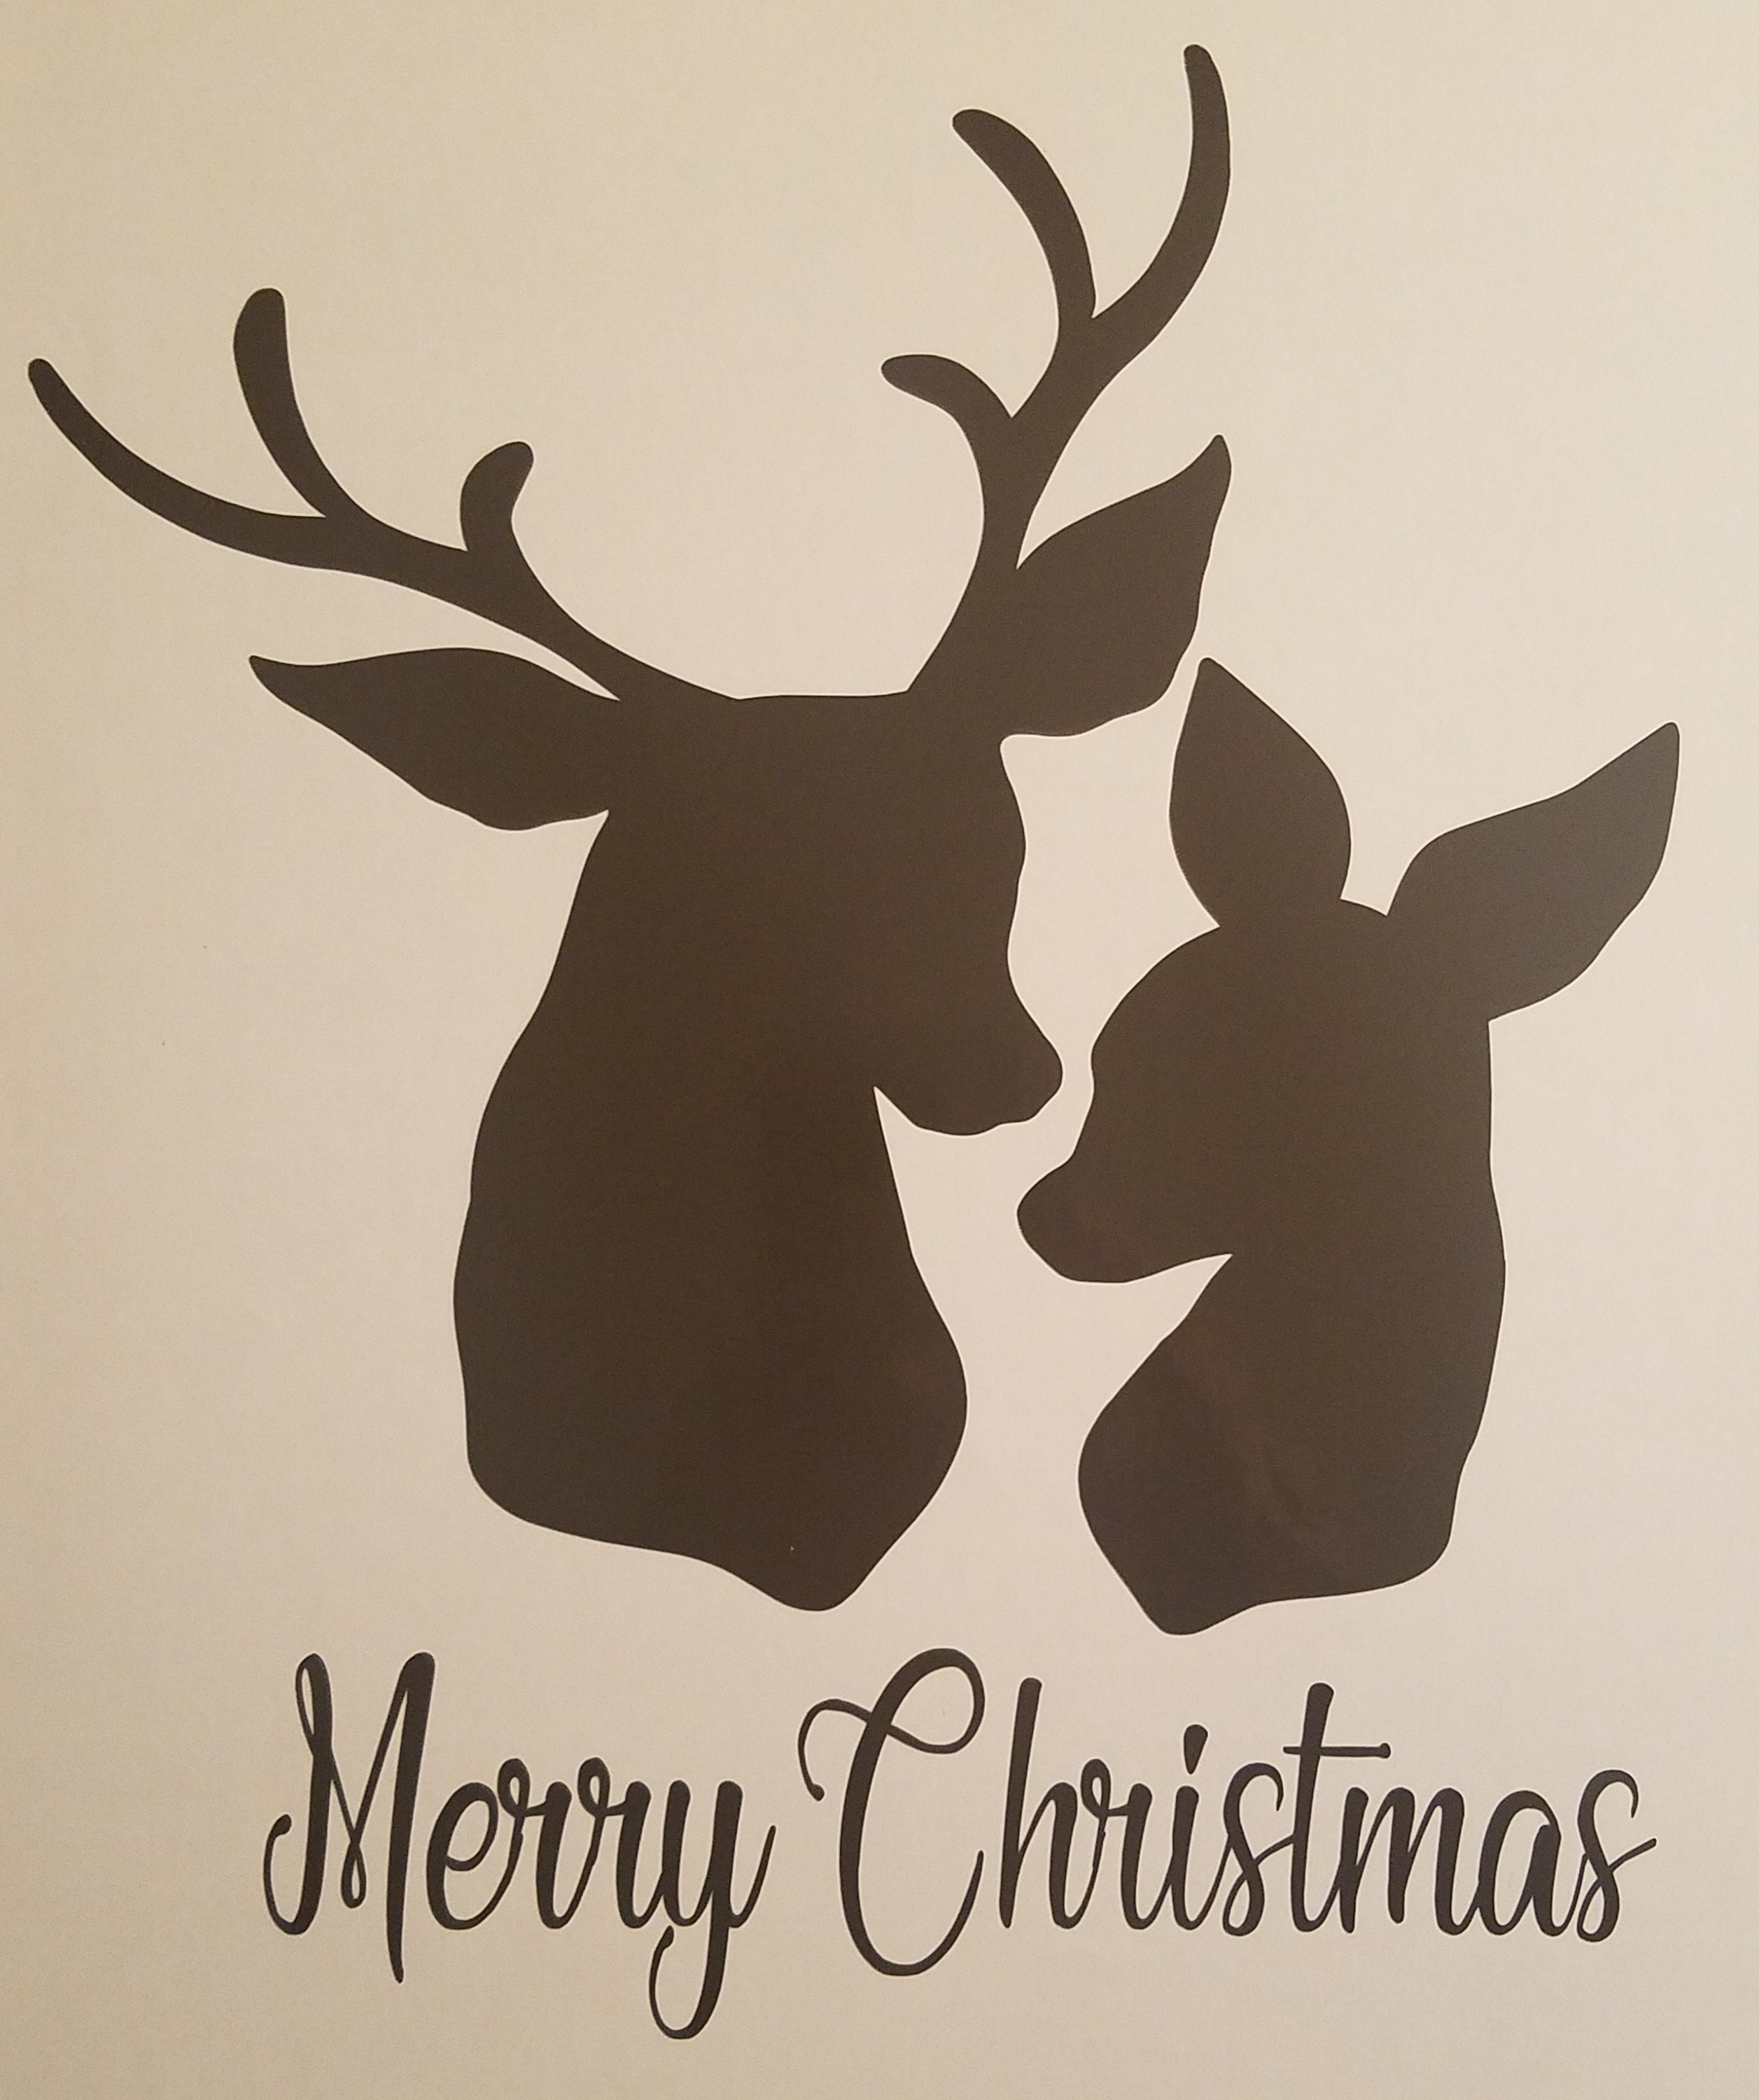 Merry Christmas Reindeer Decal Holiday Decor Decor Serving Plates Pillow Decals T Shirts Laptop Deer Sweatshirts HTV or Vinyl Decal